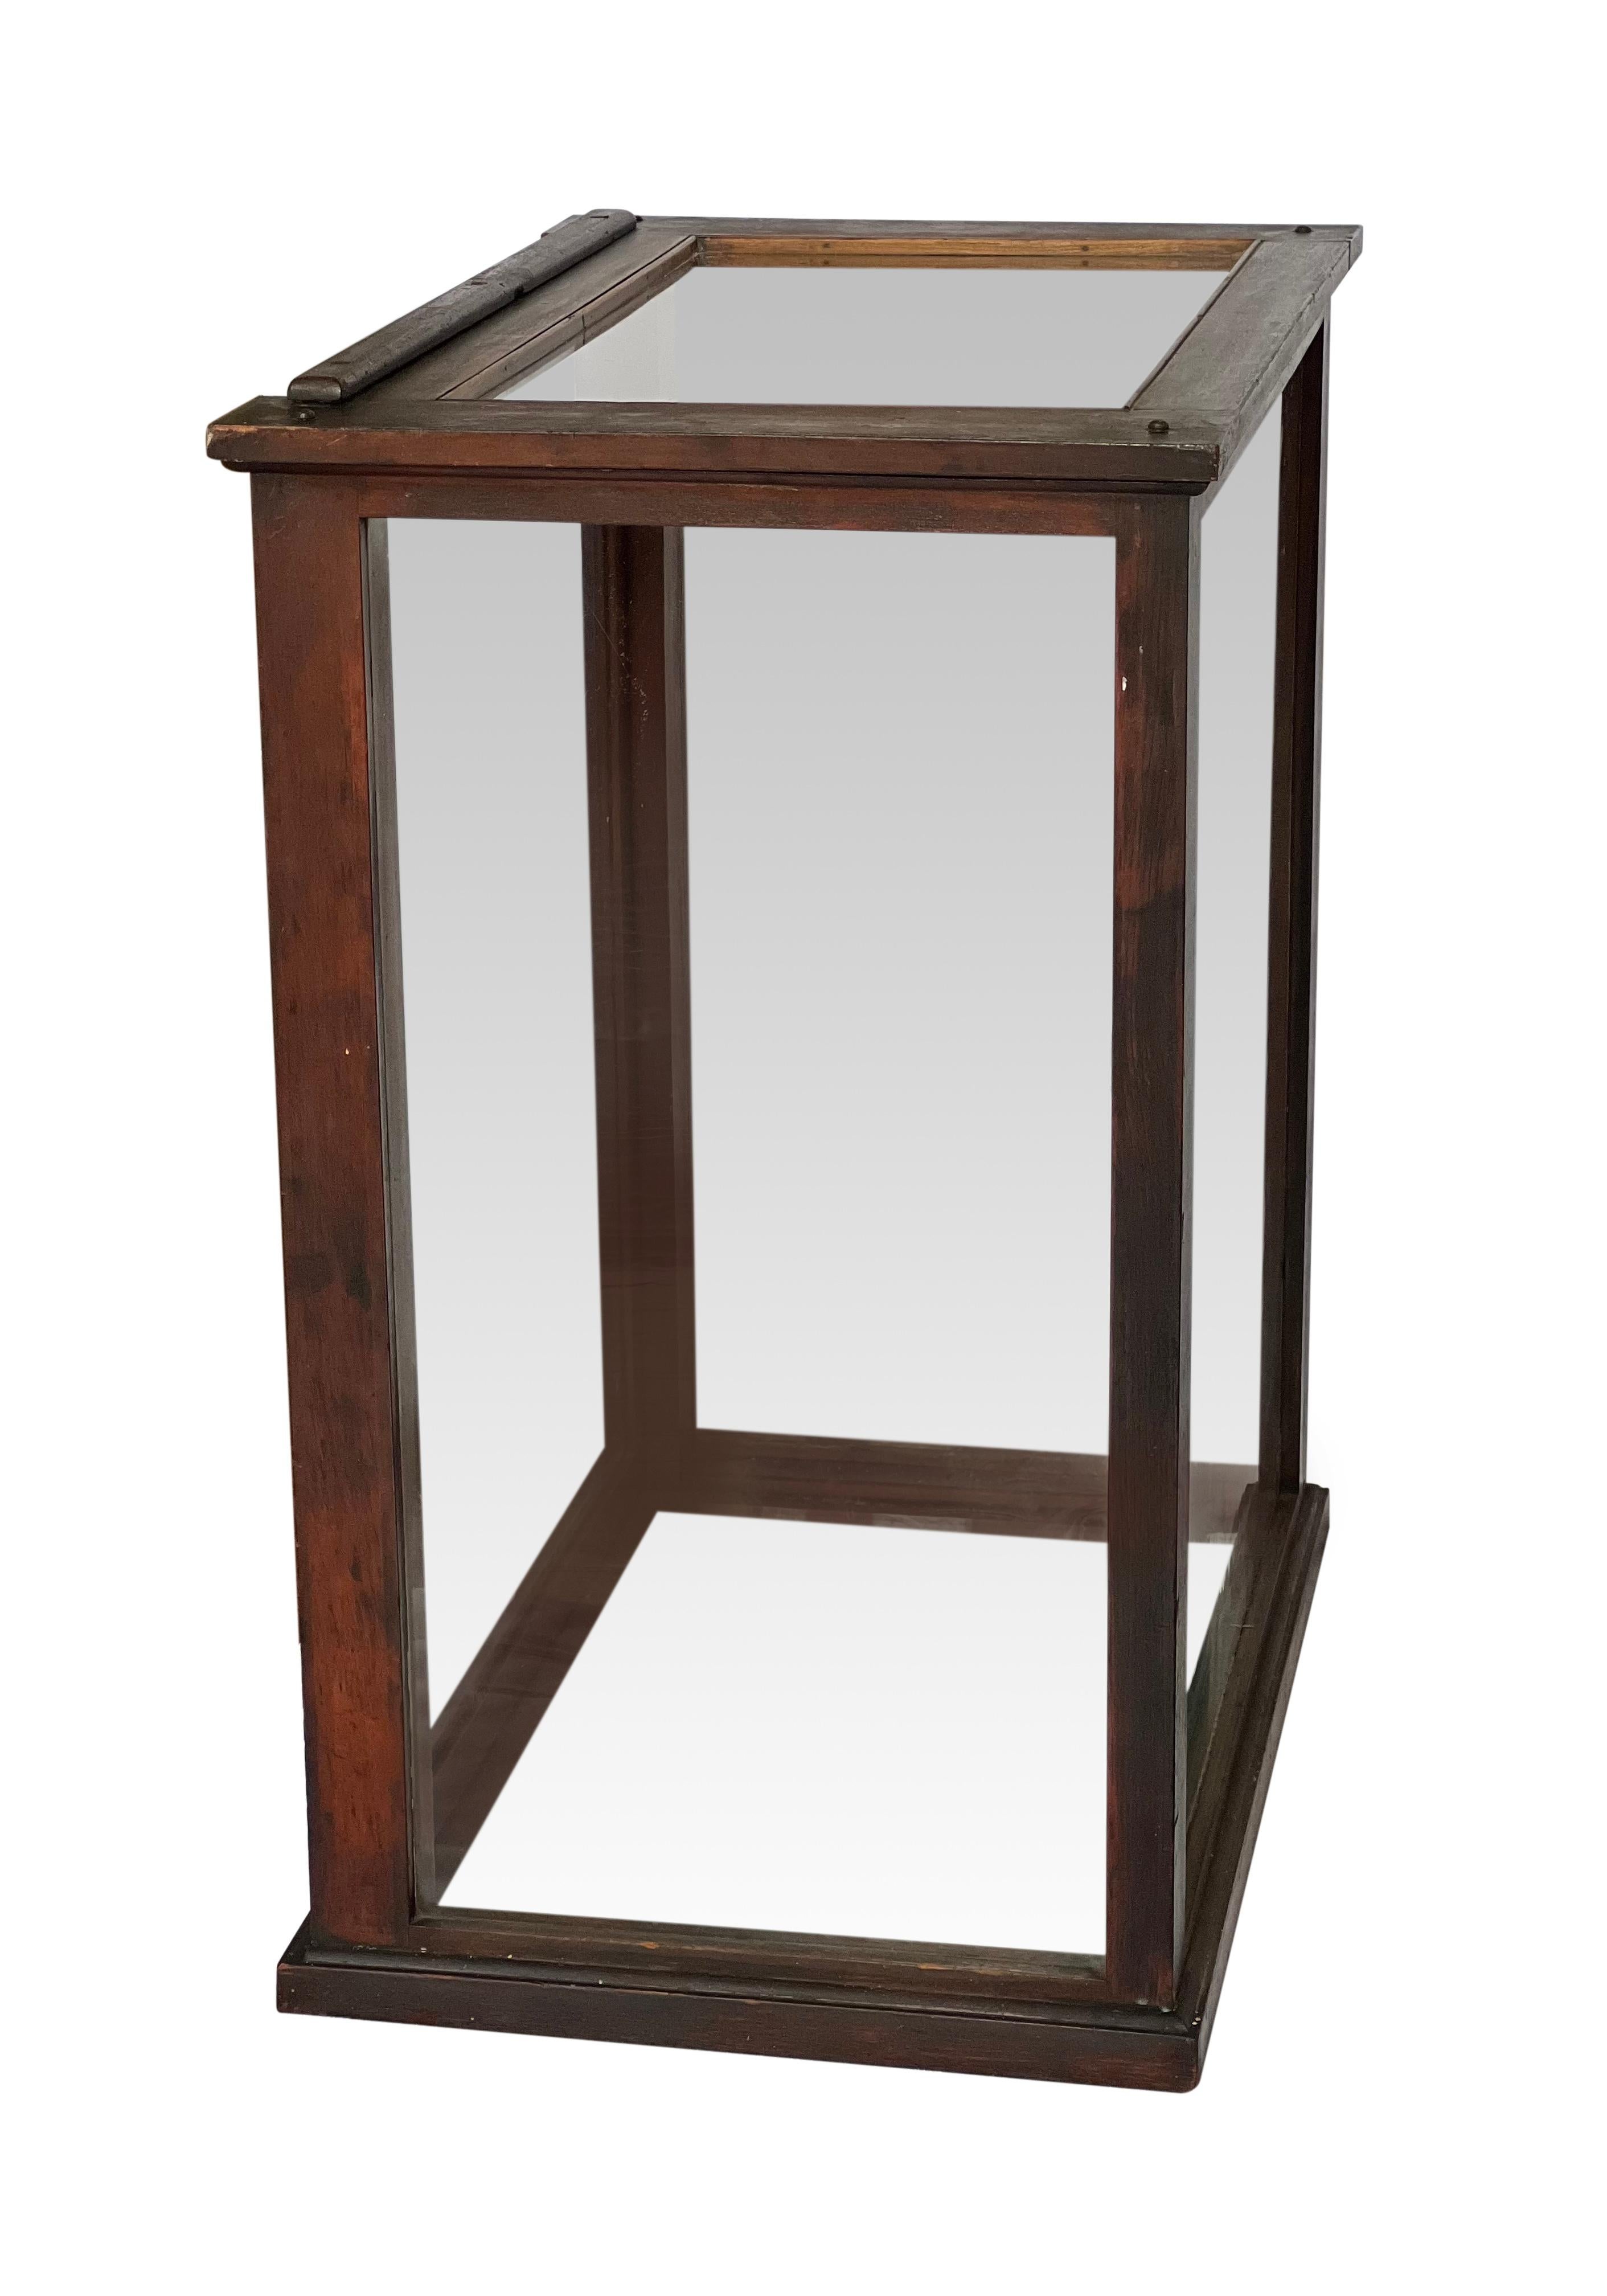 Antique English Mahogany and Glass Countertop Shop Display Case In Good Condition For Sale In Doylestown, PA